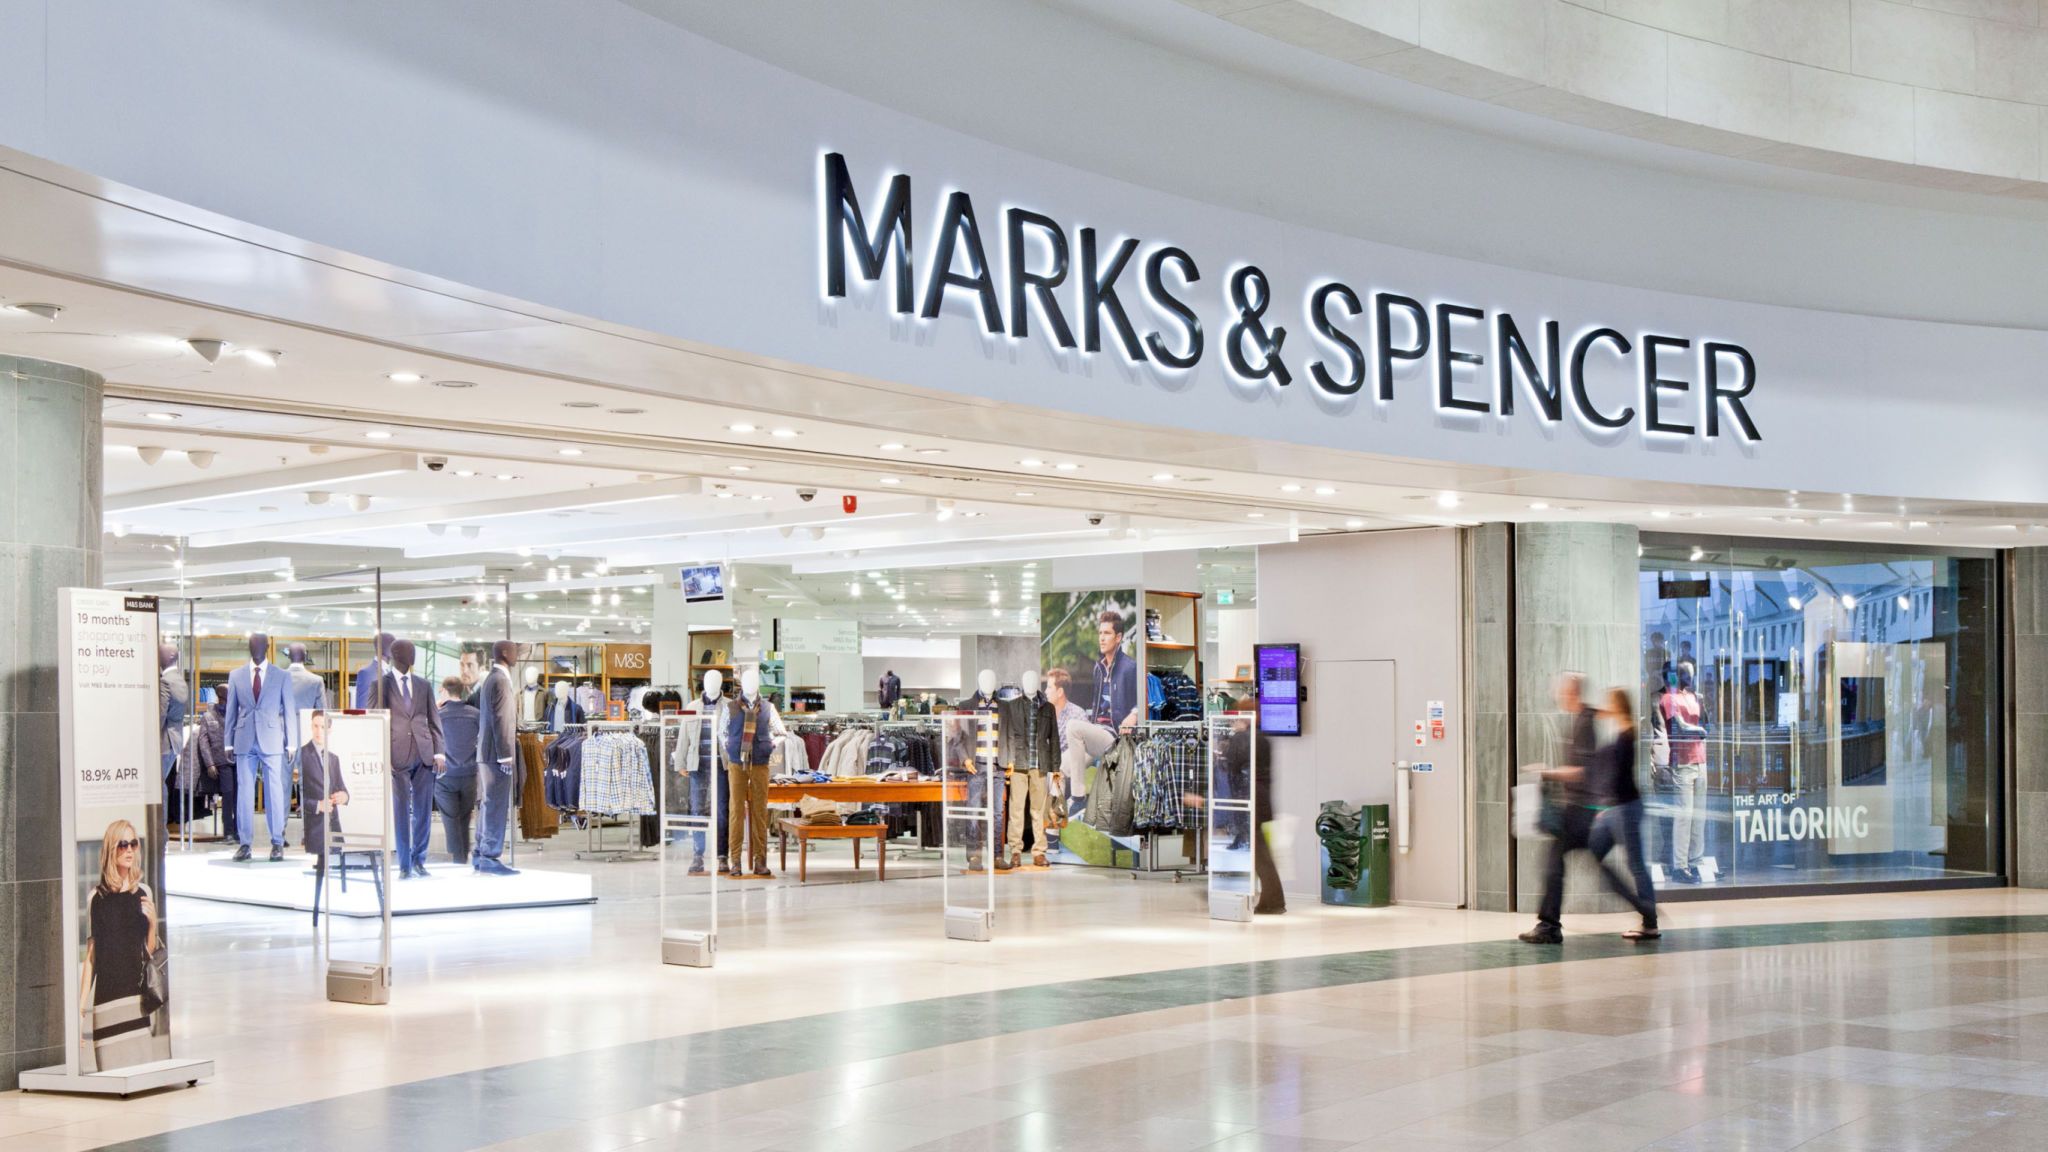 M&s At The Bluewater Shopping Centre - Marks And Spencer Bluewater - HD Wallpaper 